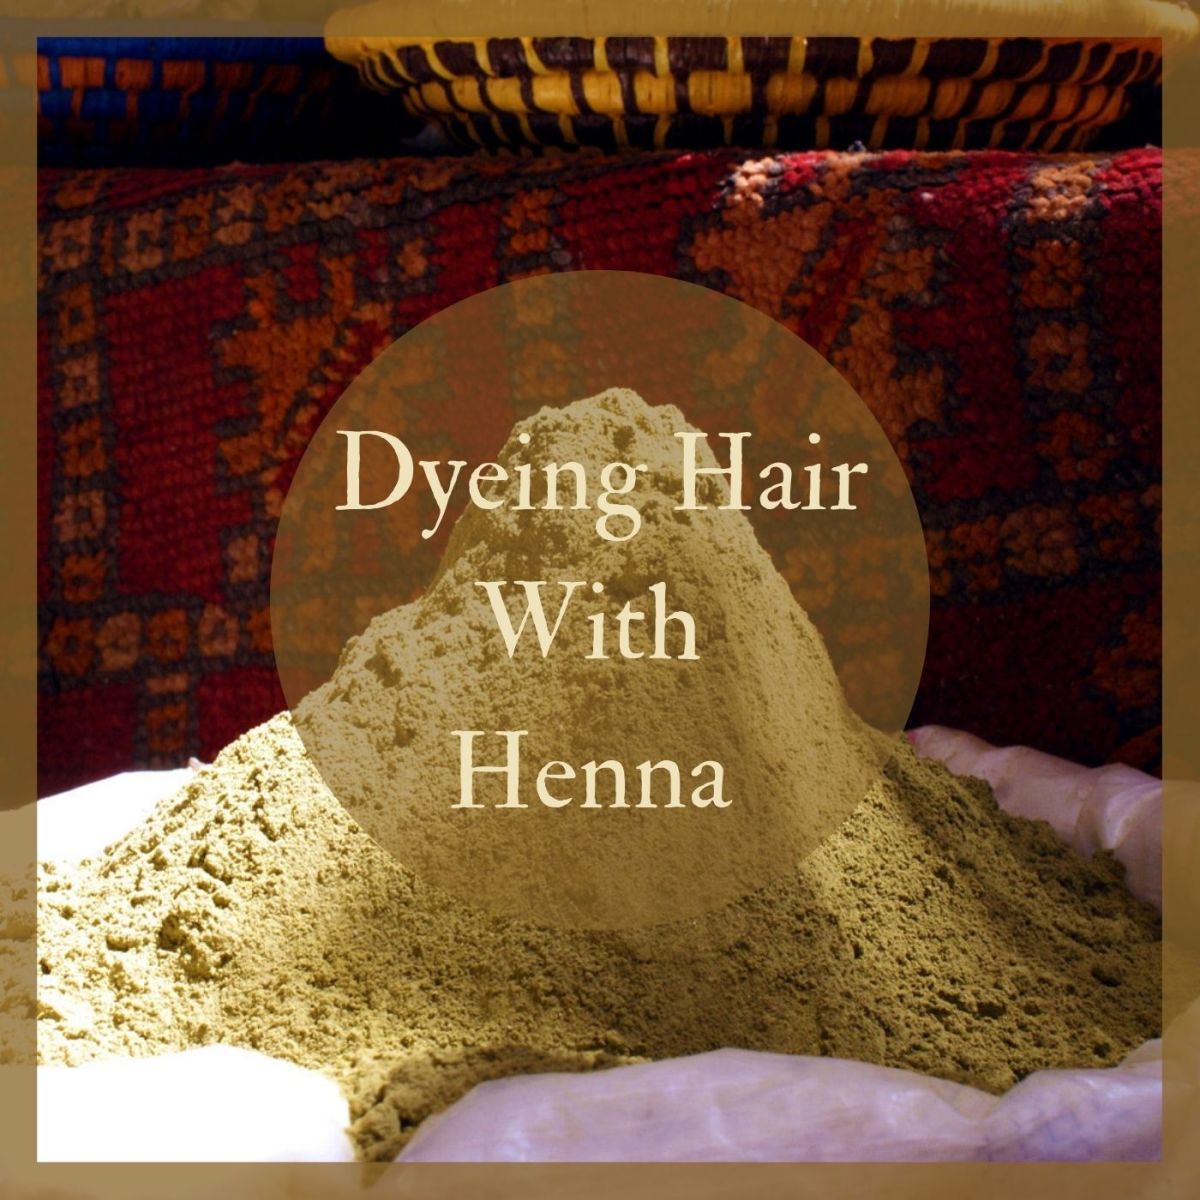 How to Apply Henna to Hair